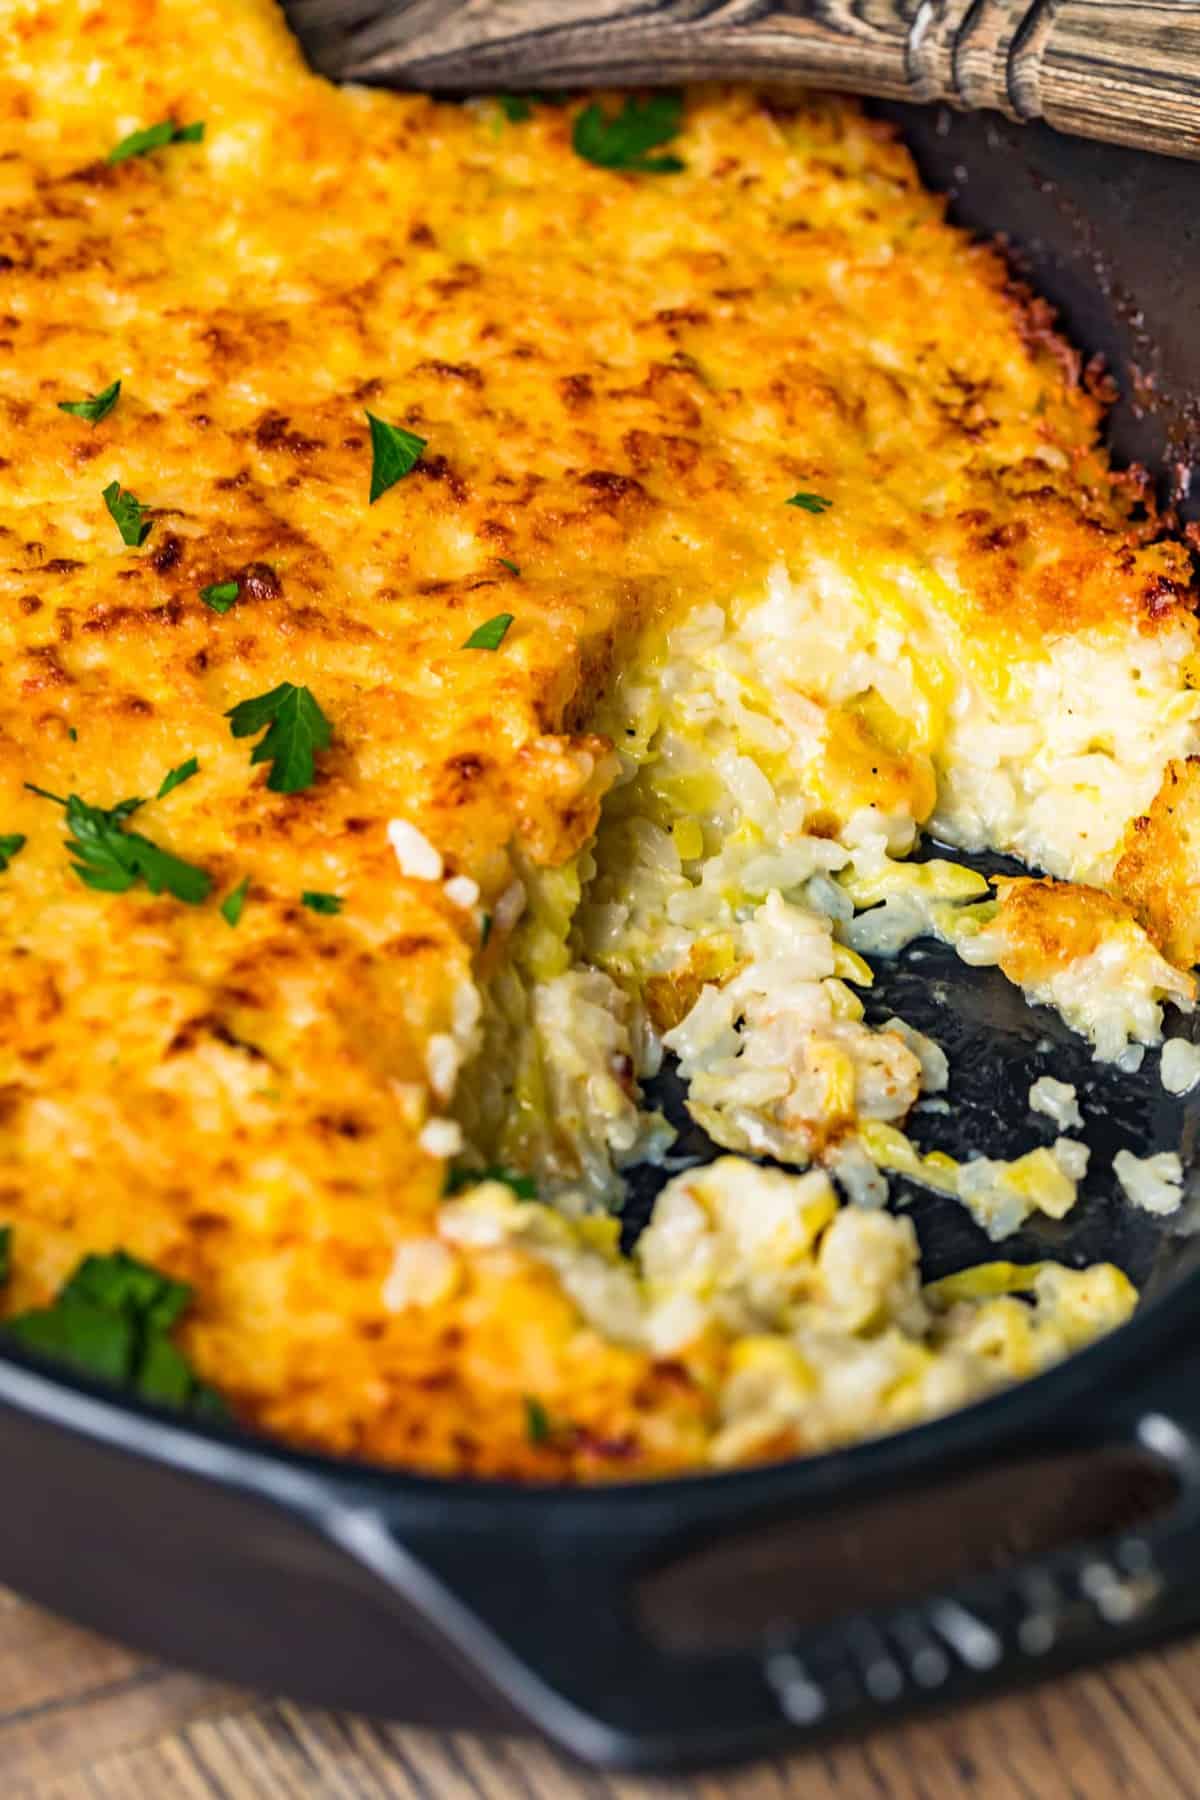 A cheesy baked side dish with rice